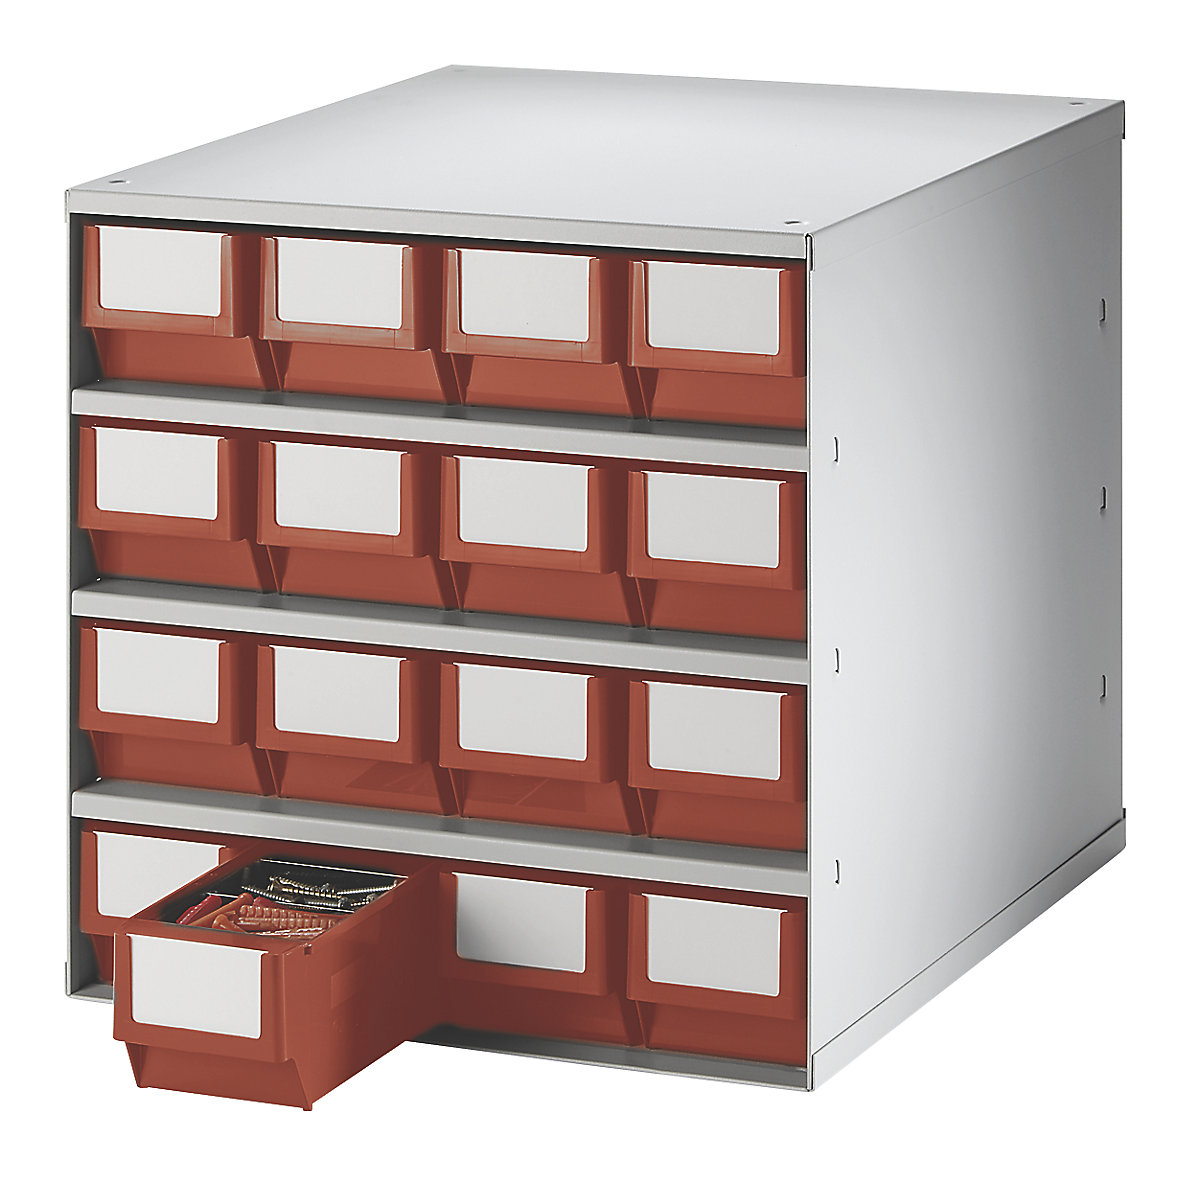 Drawer cabinet, max. housing load 75 kg, HxWxD 395 x 376 x 400 mm, 16 drawers, red drawers-3